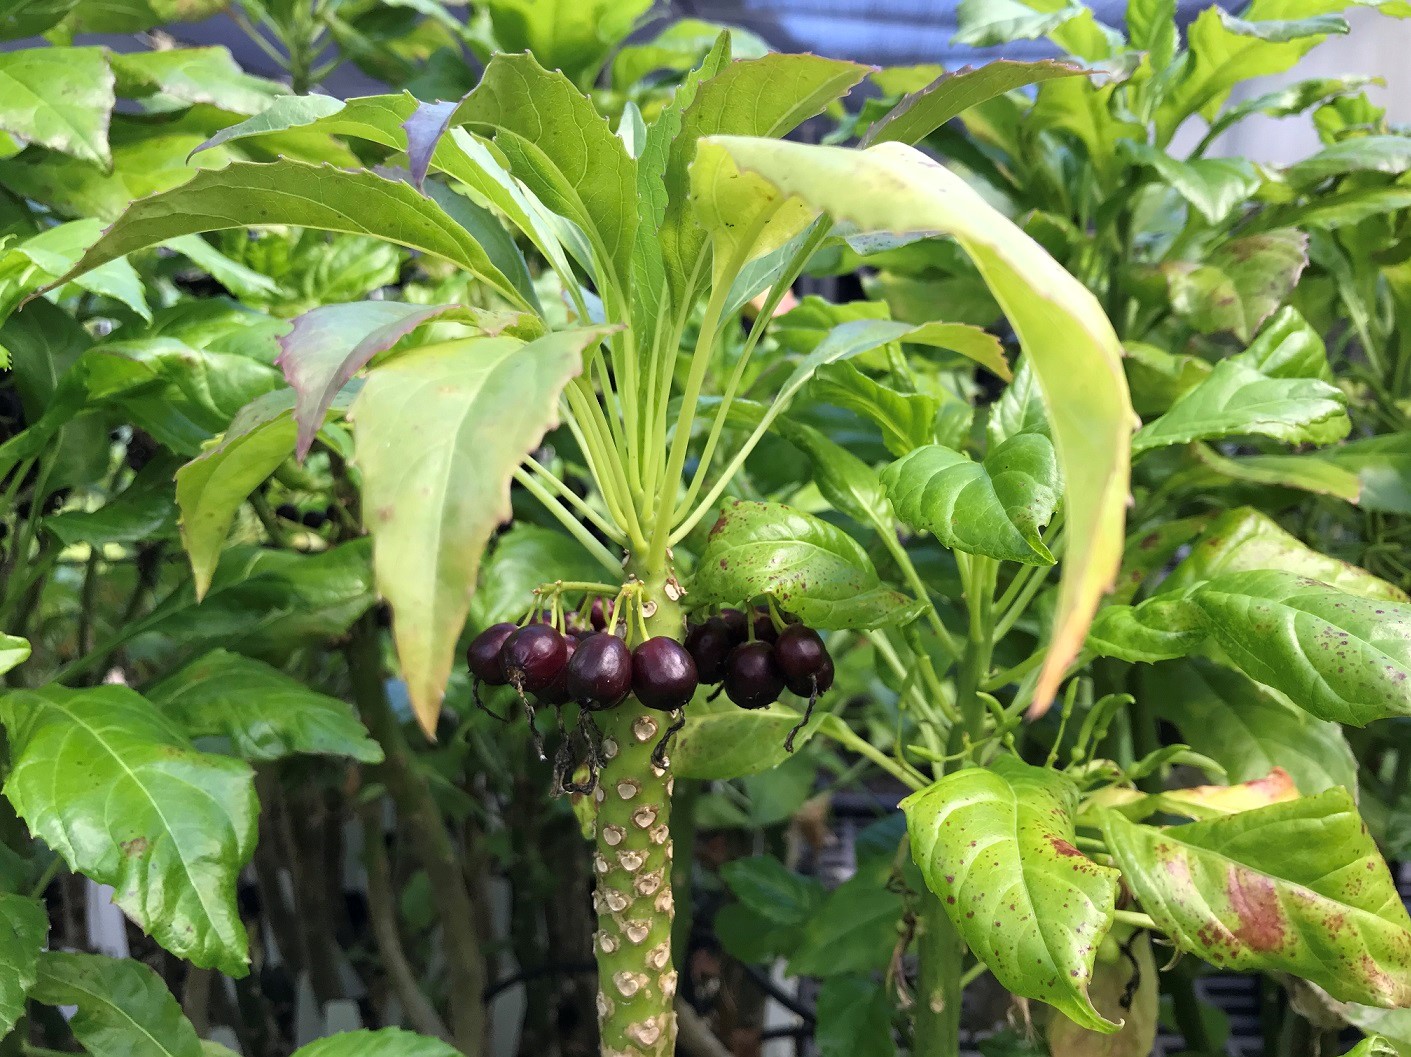 A straight green stem with many leaf scars. At the top of the stem a whorl of deep purple round fruits are present. From the top of the long stemed leaves are shooting. The leaves a simple with a tooth margin and a pointed tip.